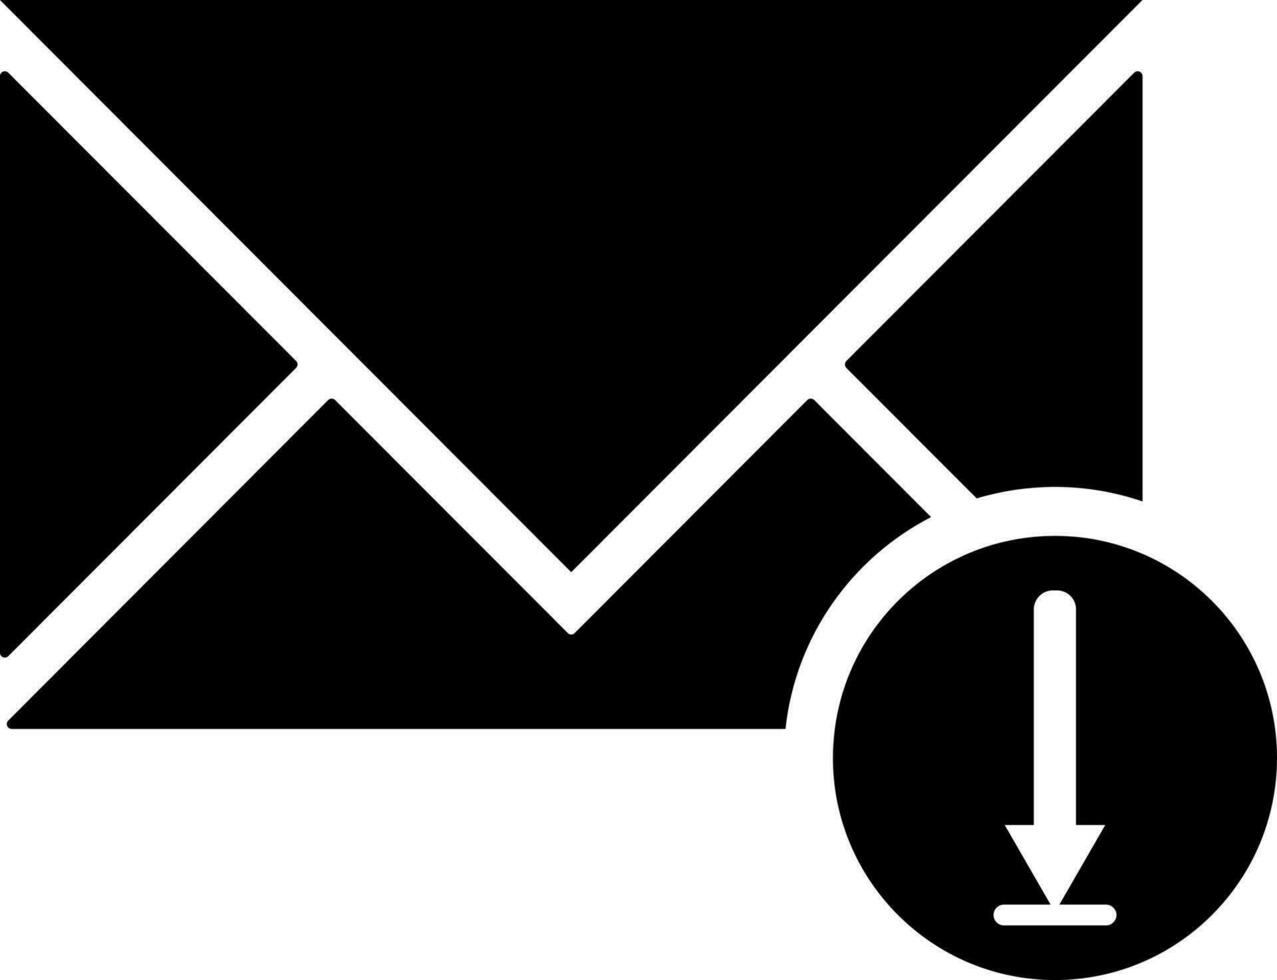 Email received or download glyph icon in flat style. vector